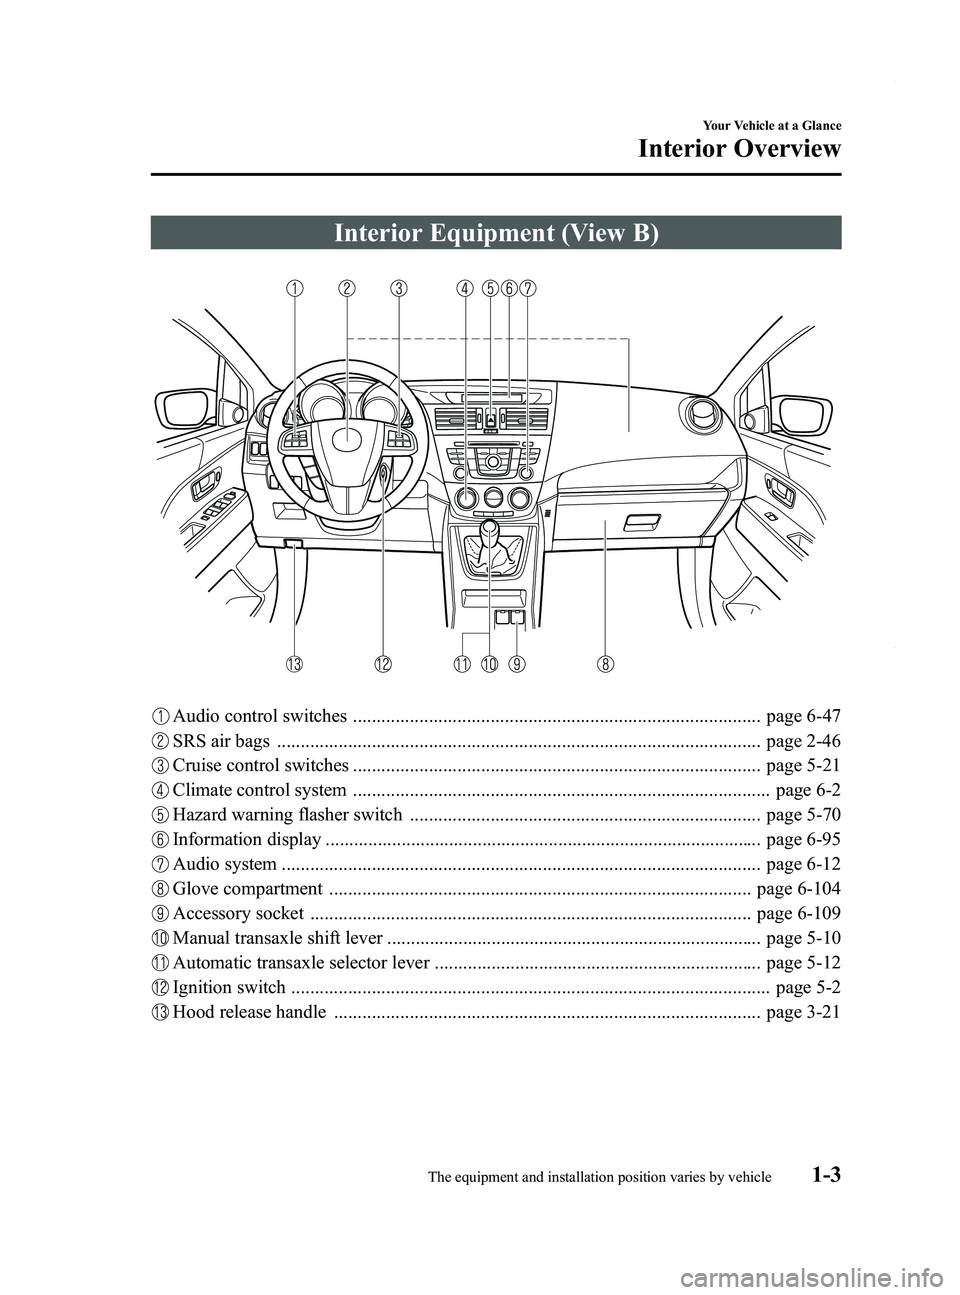 MAZDA MODEL 5 2014  Owners Manual Black plate (9,1)
Interior Equipment (View B)
Audio control switches ...................................................................................... page 6-47
SRS air bags .....................